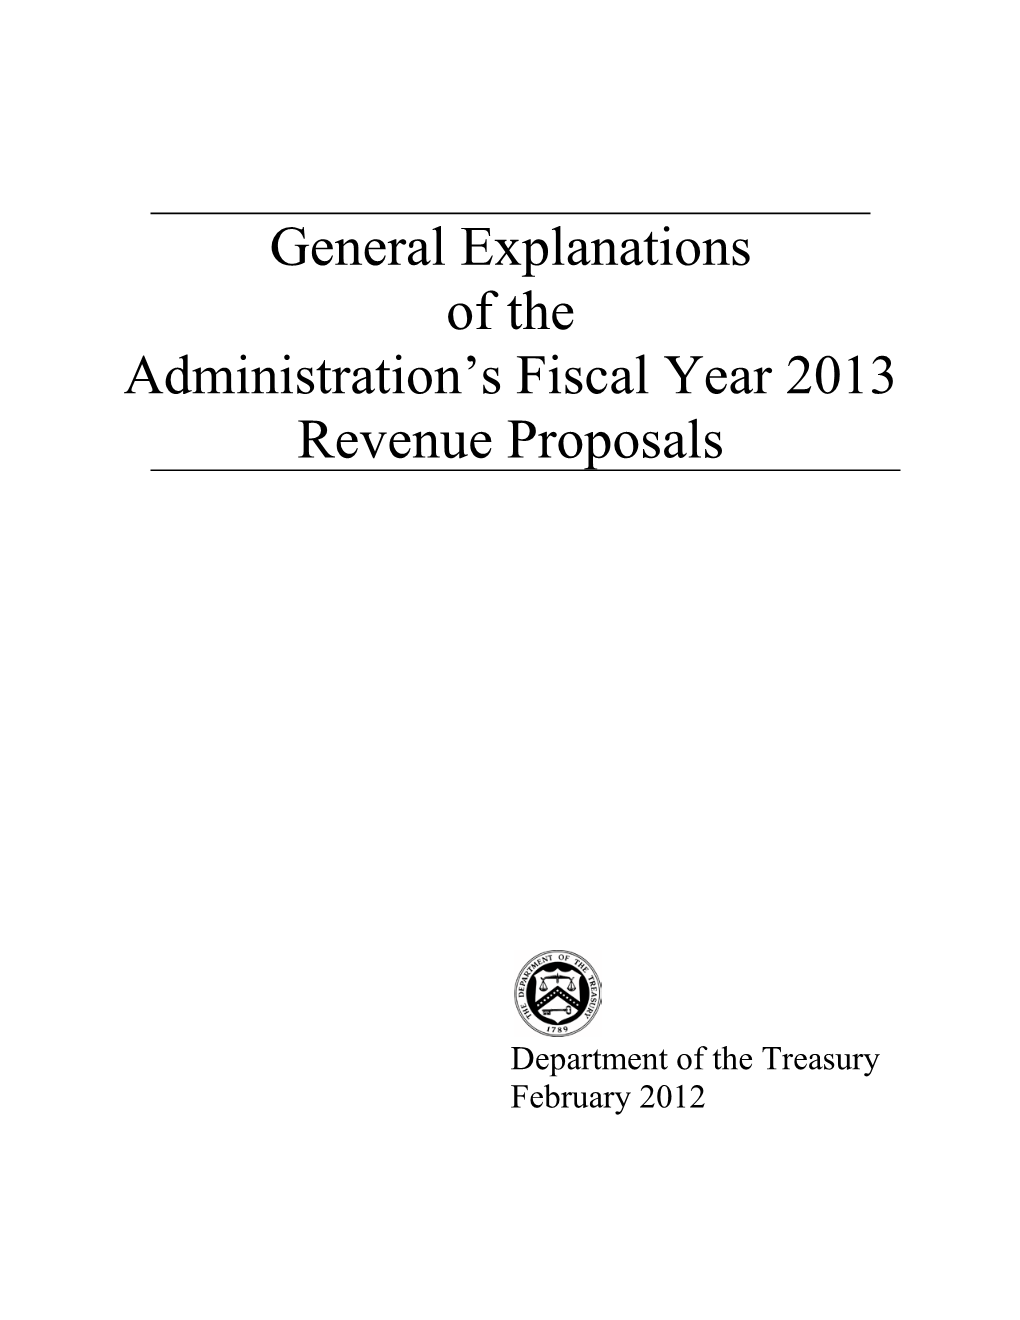 The Administration's Fiscal Year 2013 Revenue Proposals